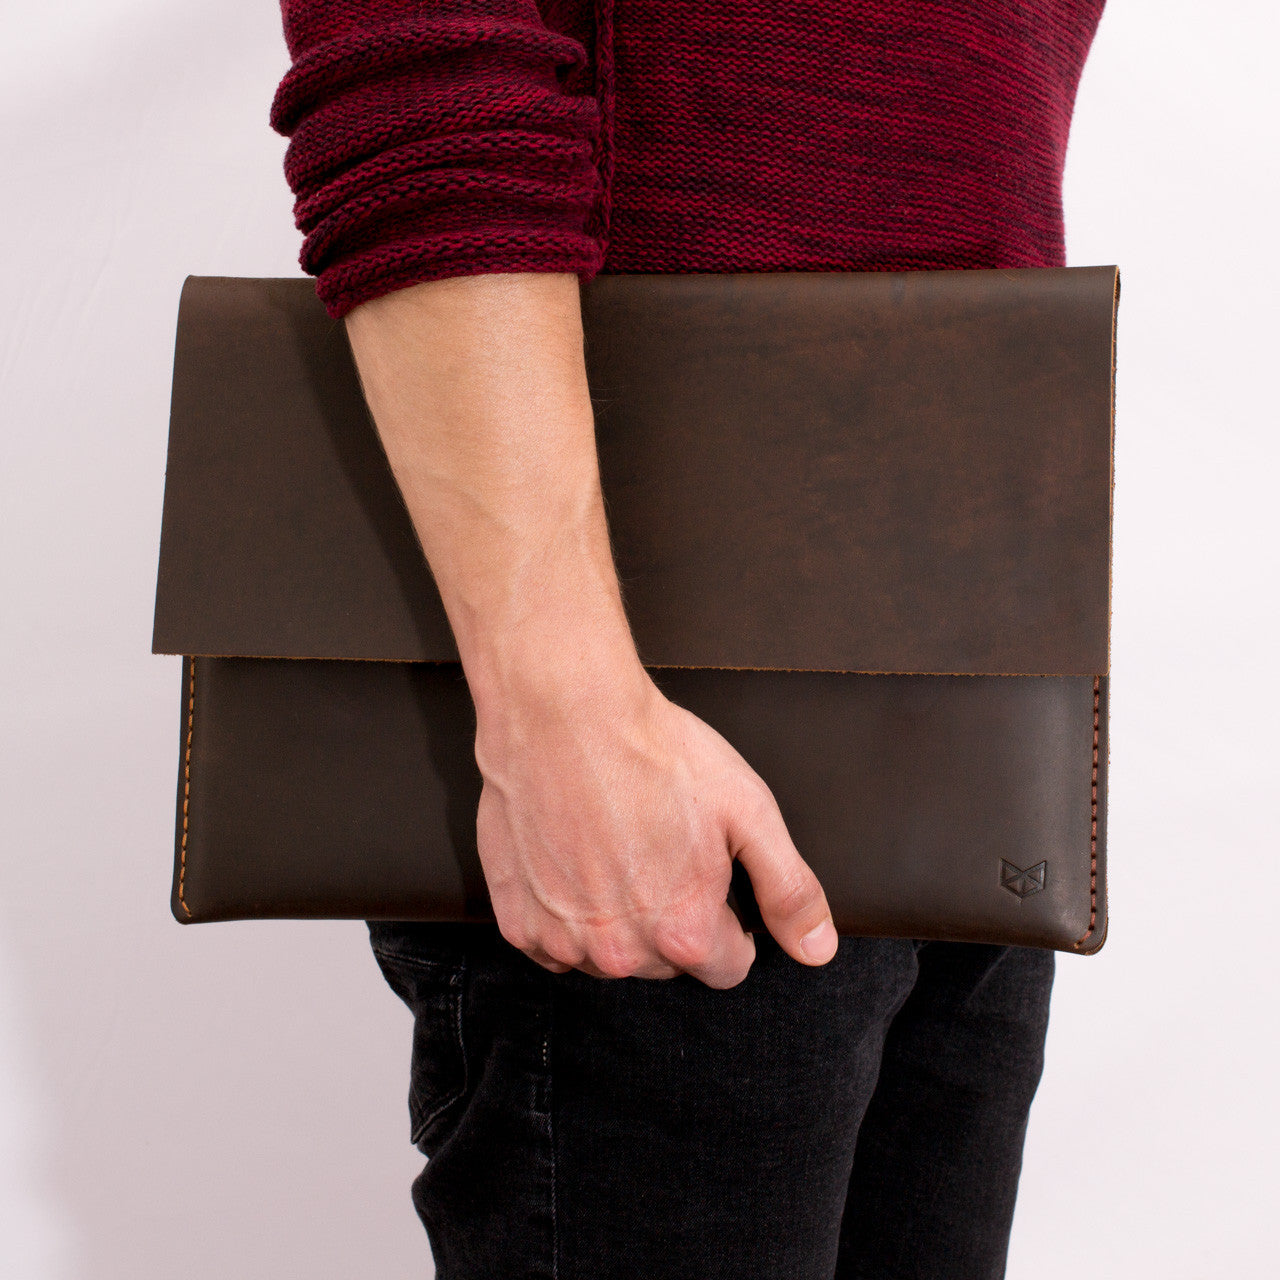 Carrying the new Microsoft Surface leather sleeve